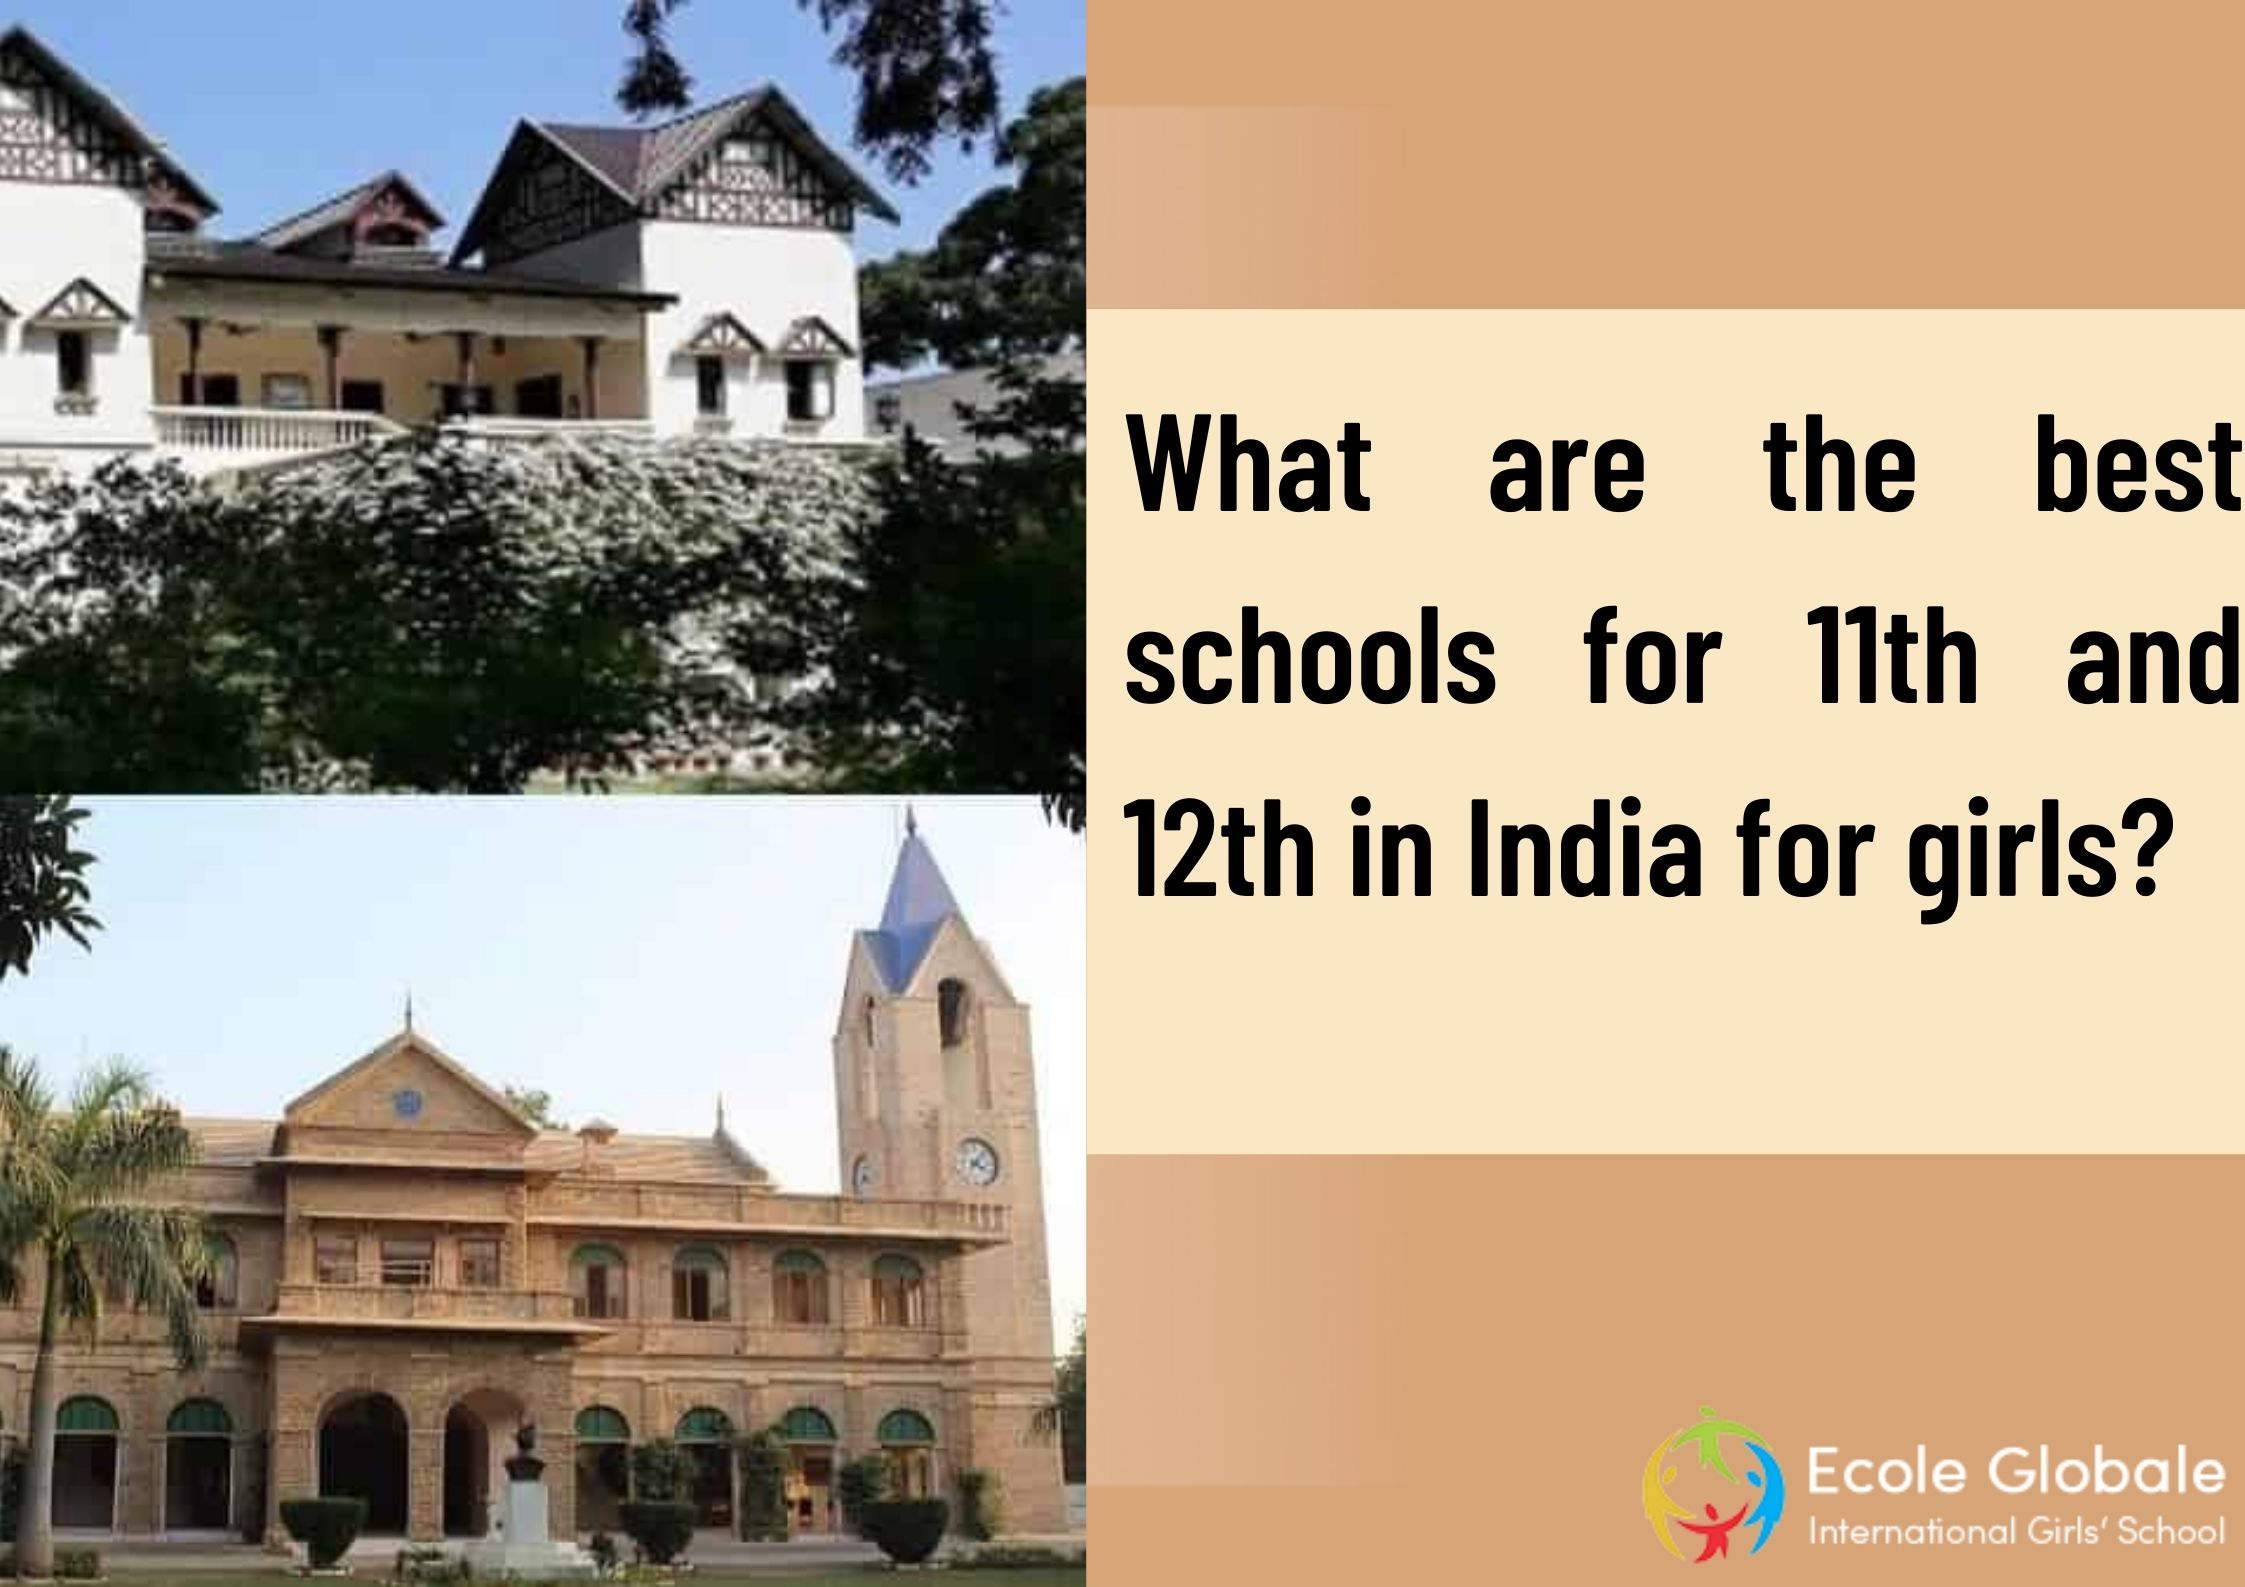 What are the best schools for 11th and 12th in India for girls?